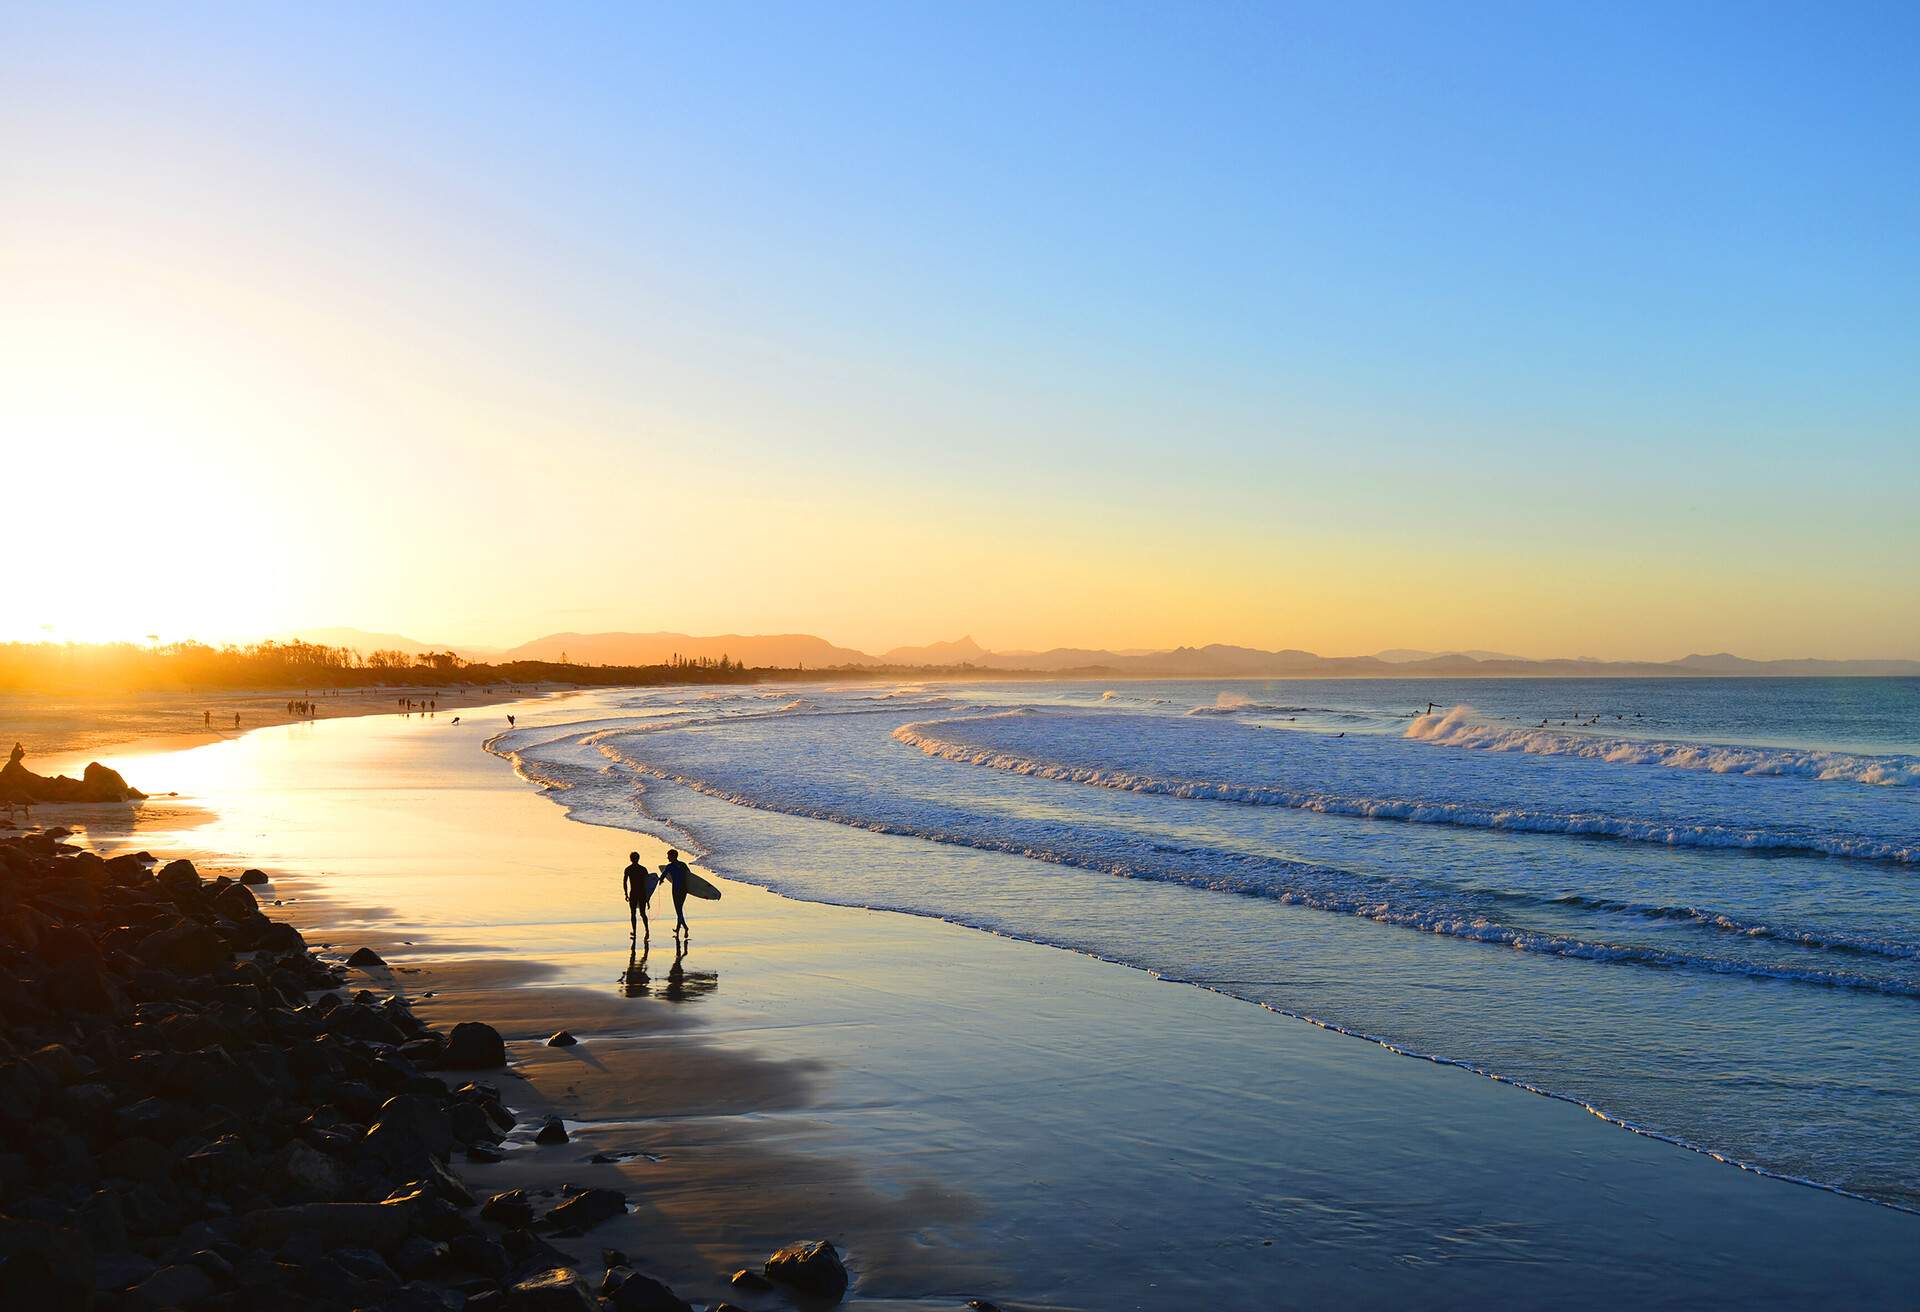 A silhouette of two surfers walking along the beach, with waves gently lapping on the shore, set against the backdrop of a beautiful sunset.